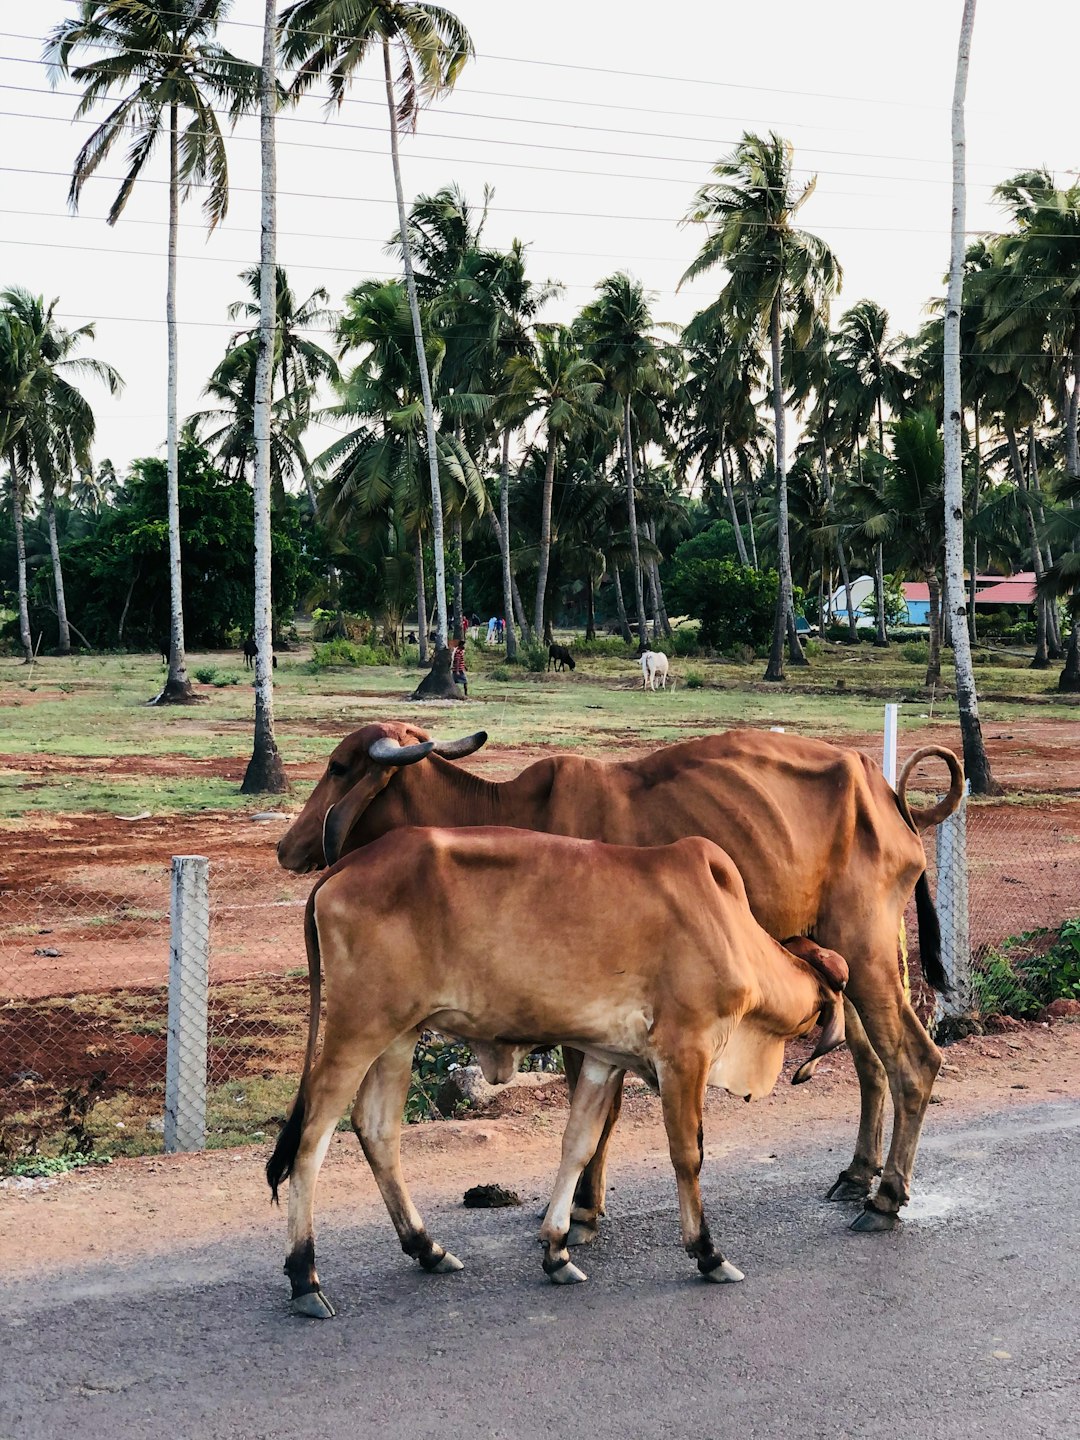 Travel Tips and Stories of Siolim in India